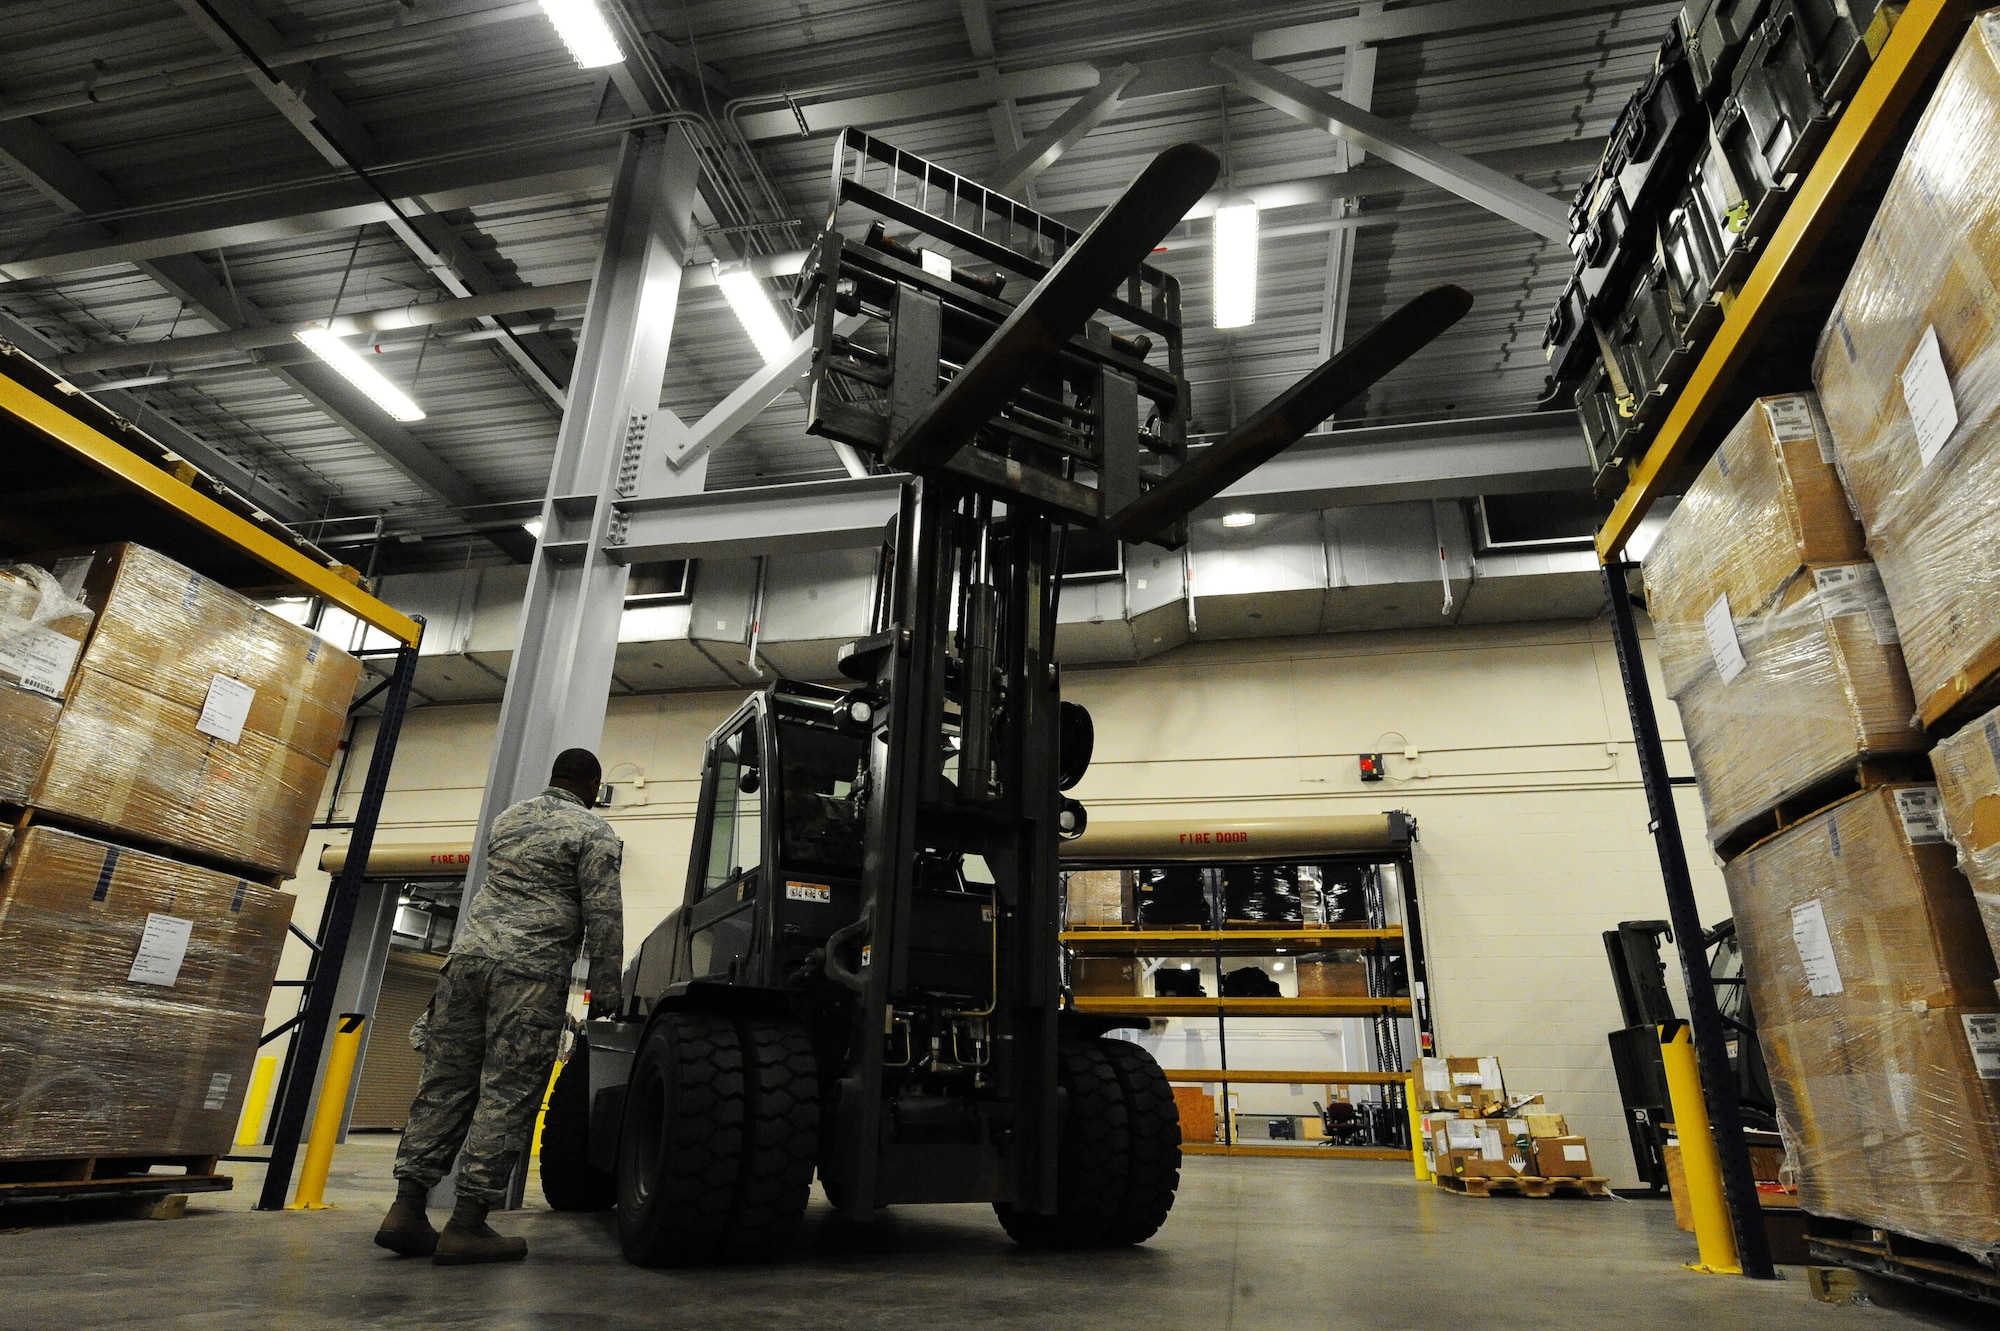 Staff Sgt. Darius Brown, 1st Special Operations Logistics Readiness Squadron materiel management flight service center supervisor, directs a 4k fork lift at Hurlburt Field, Fla., June 29, 2015. The materiel management flight stocks, stores, issues and receives 27,400 line items of supplies and equipment for Hurlburt Field. (U.S. Air Force photo/Airman 1st Class Andrea Posey)